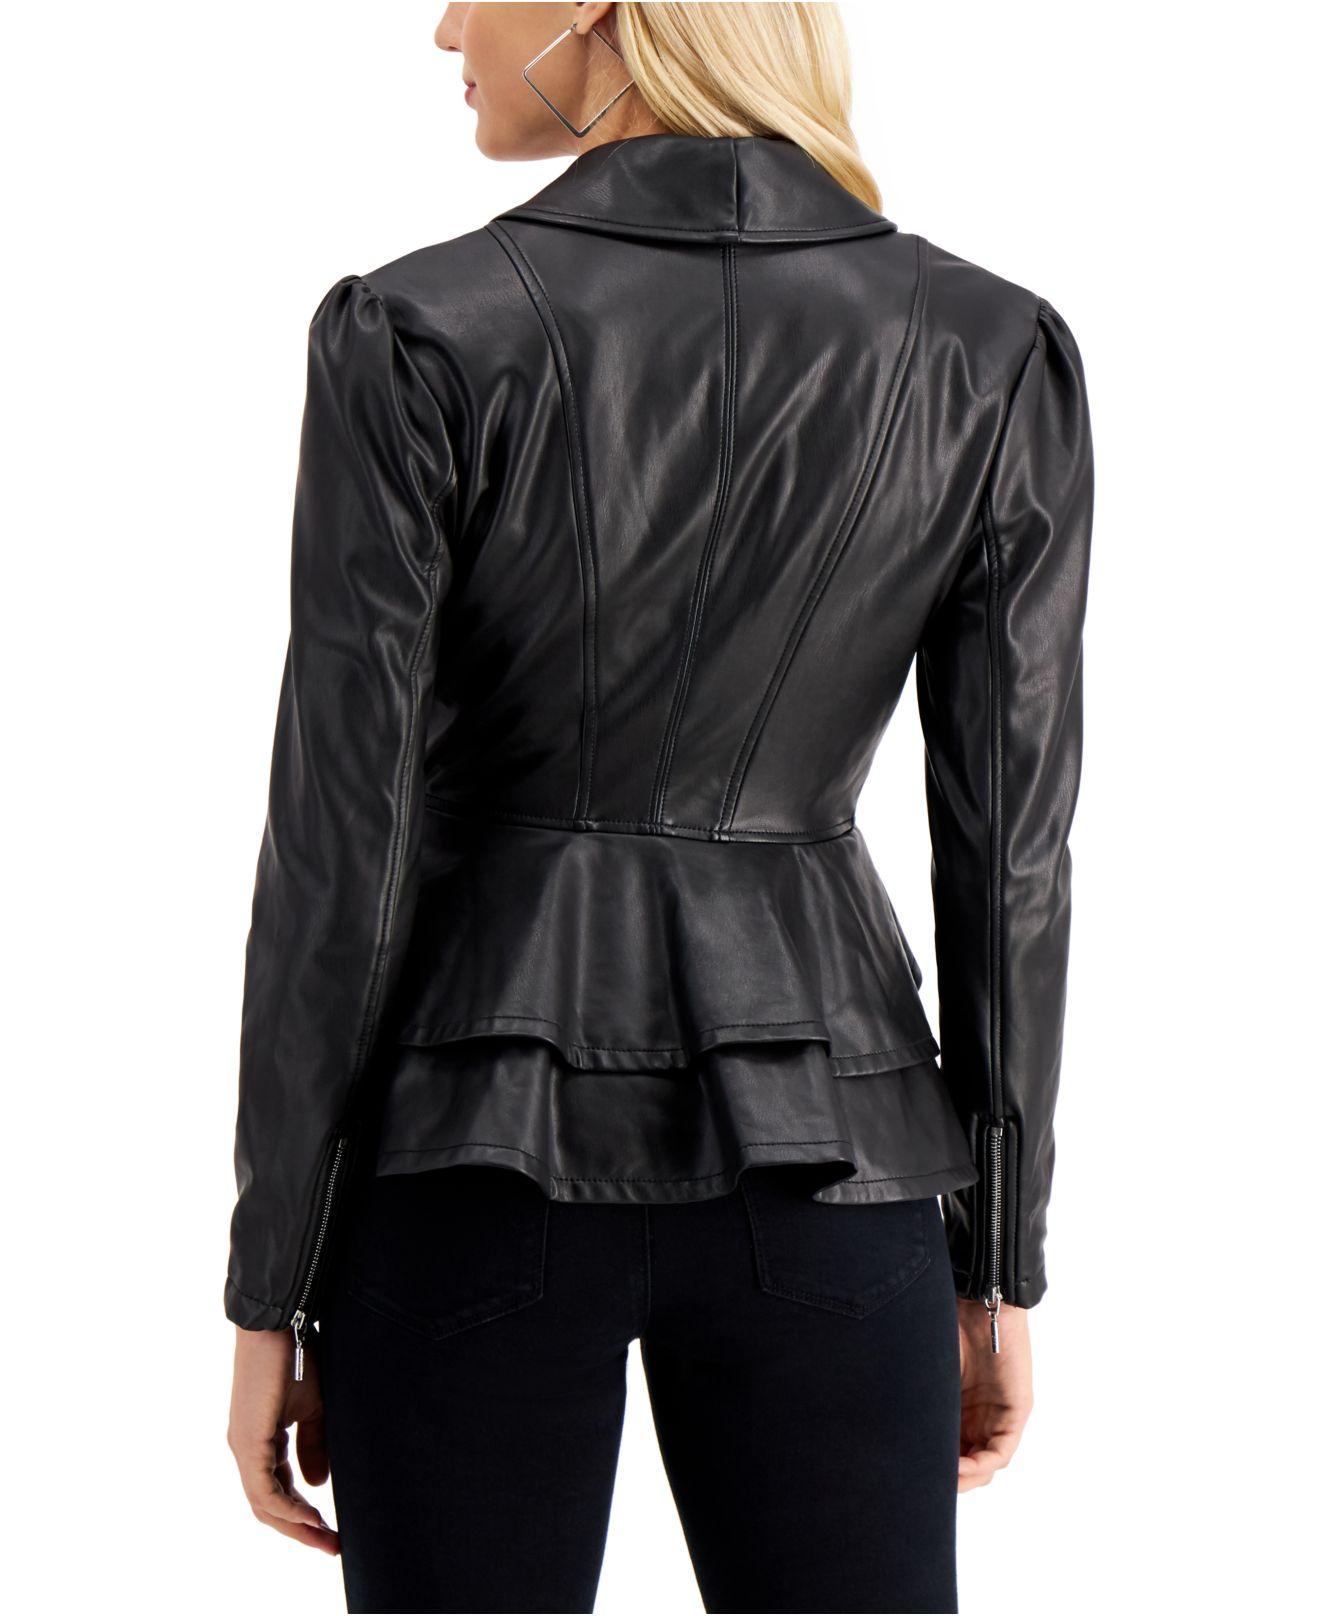 Guess Westlynn Faux-leather Peplum Jacket in Black - Lyst